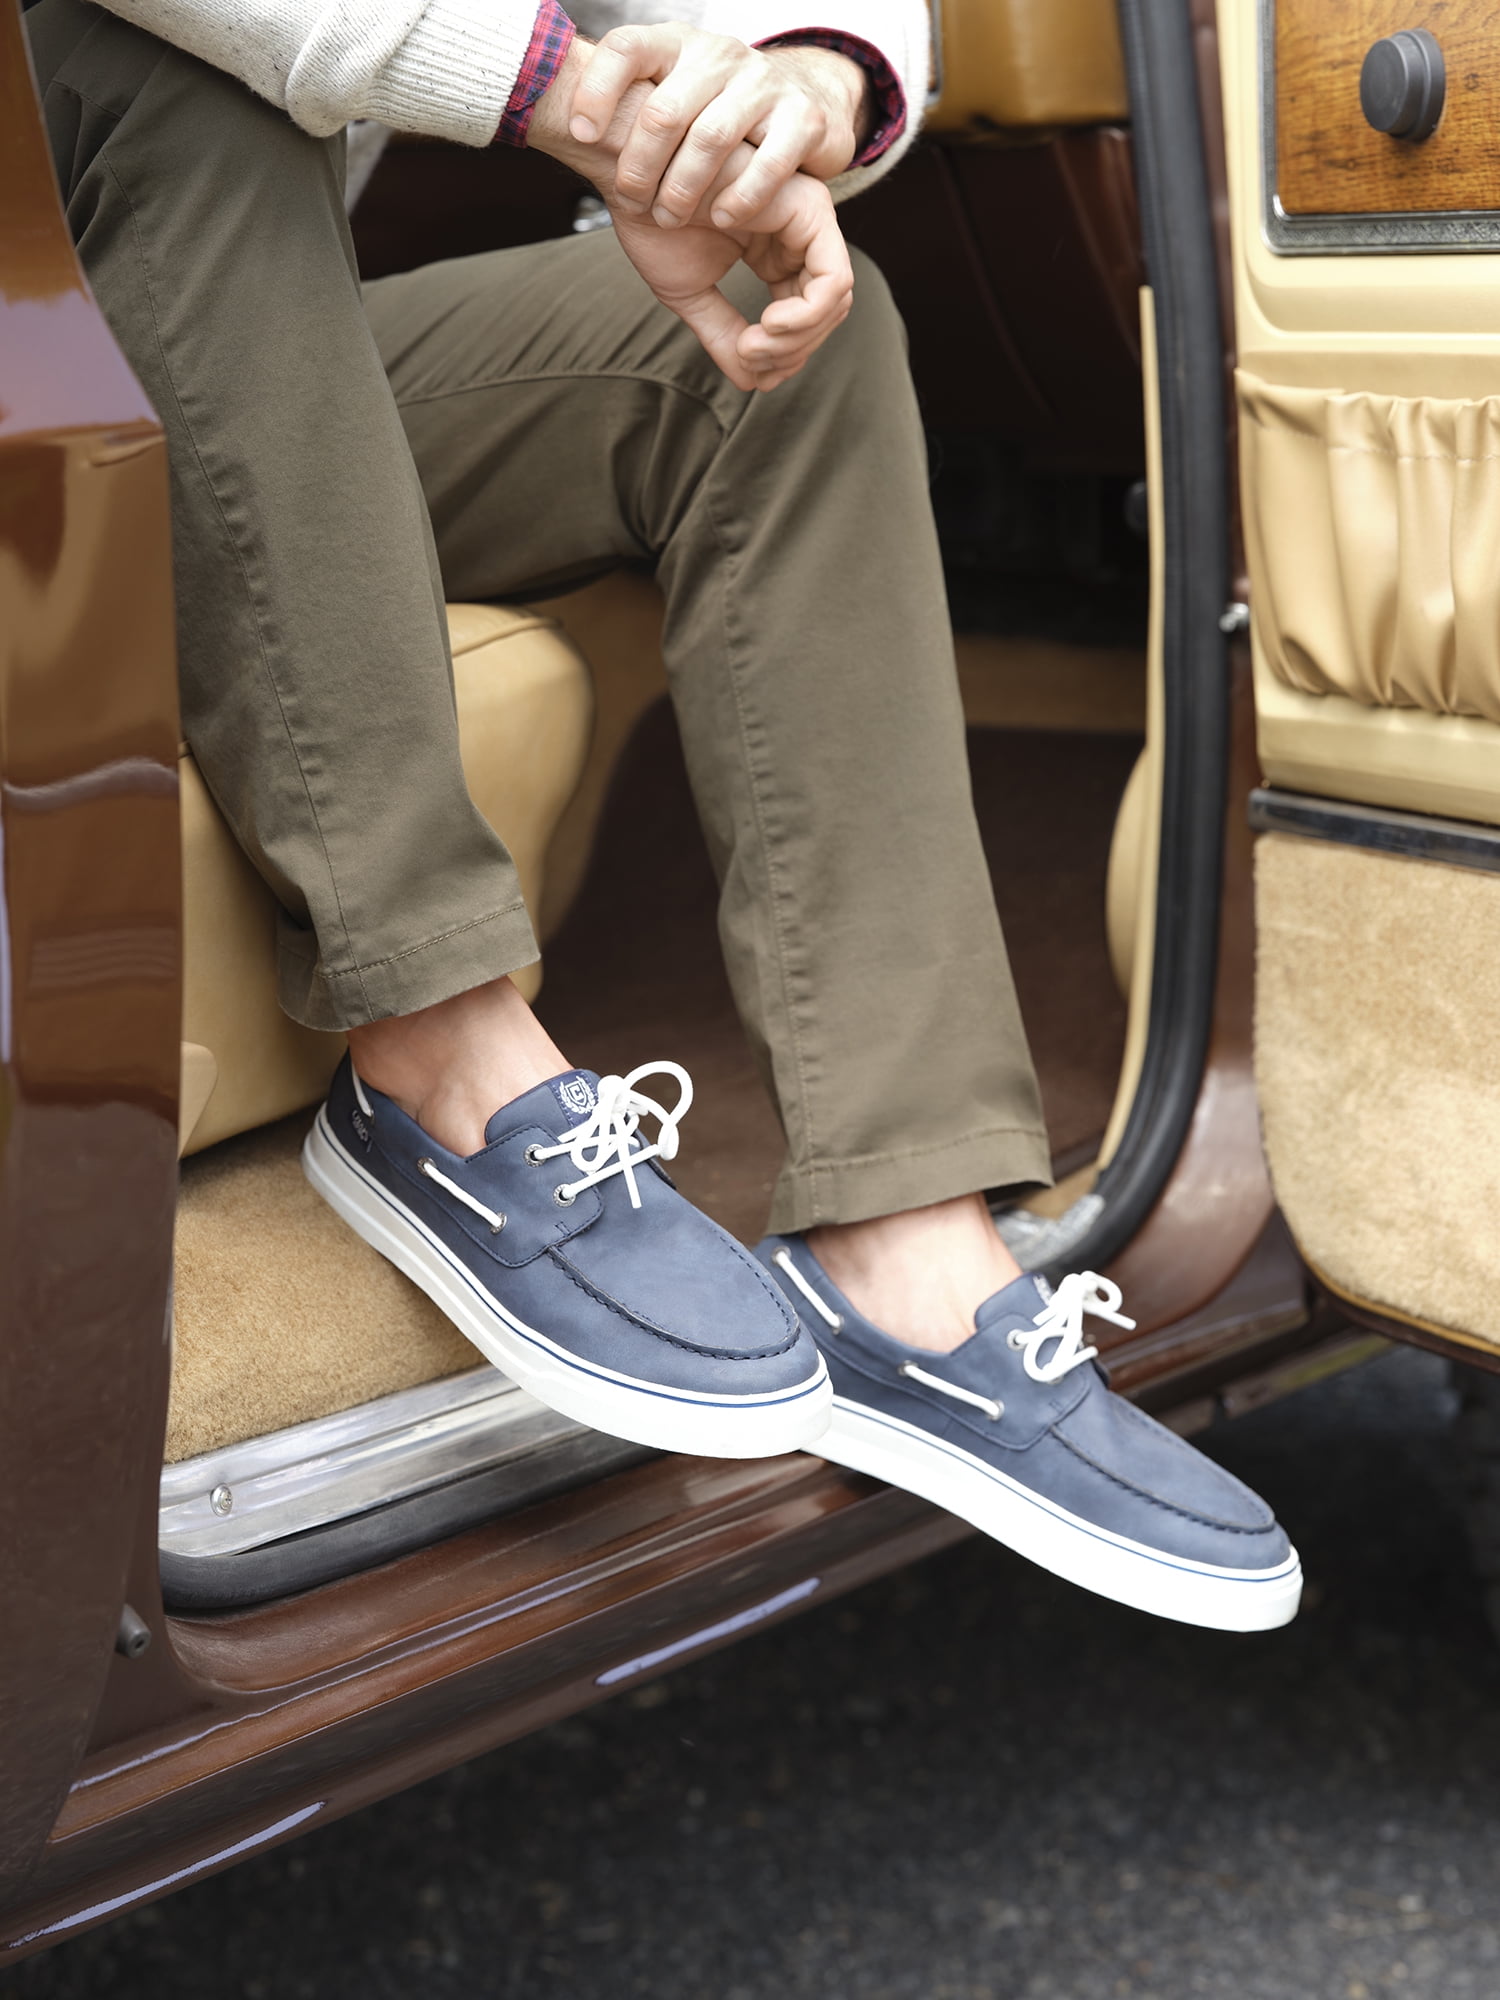 How to Wear Boat Shoes for Any Occasion - The Trend Spotter | Boat shoes  with socks, Boat shoes fashion, Boat shoes